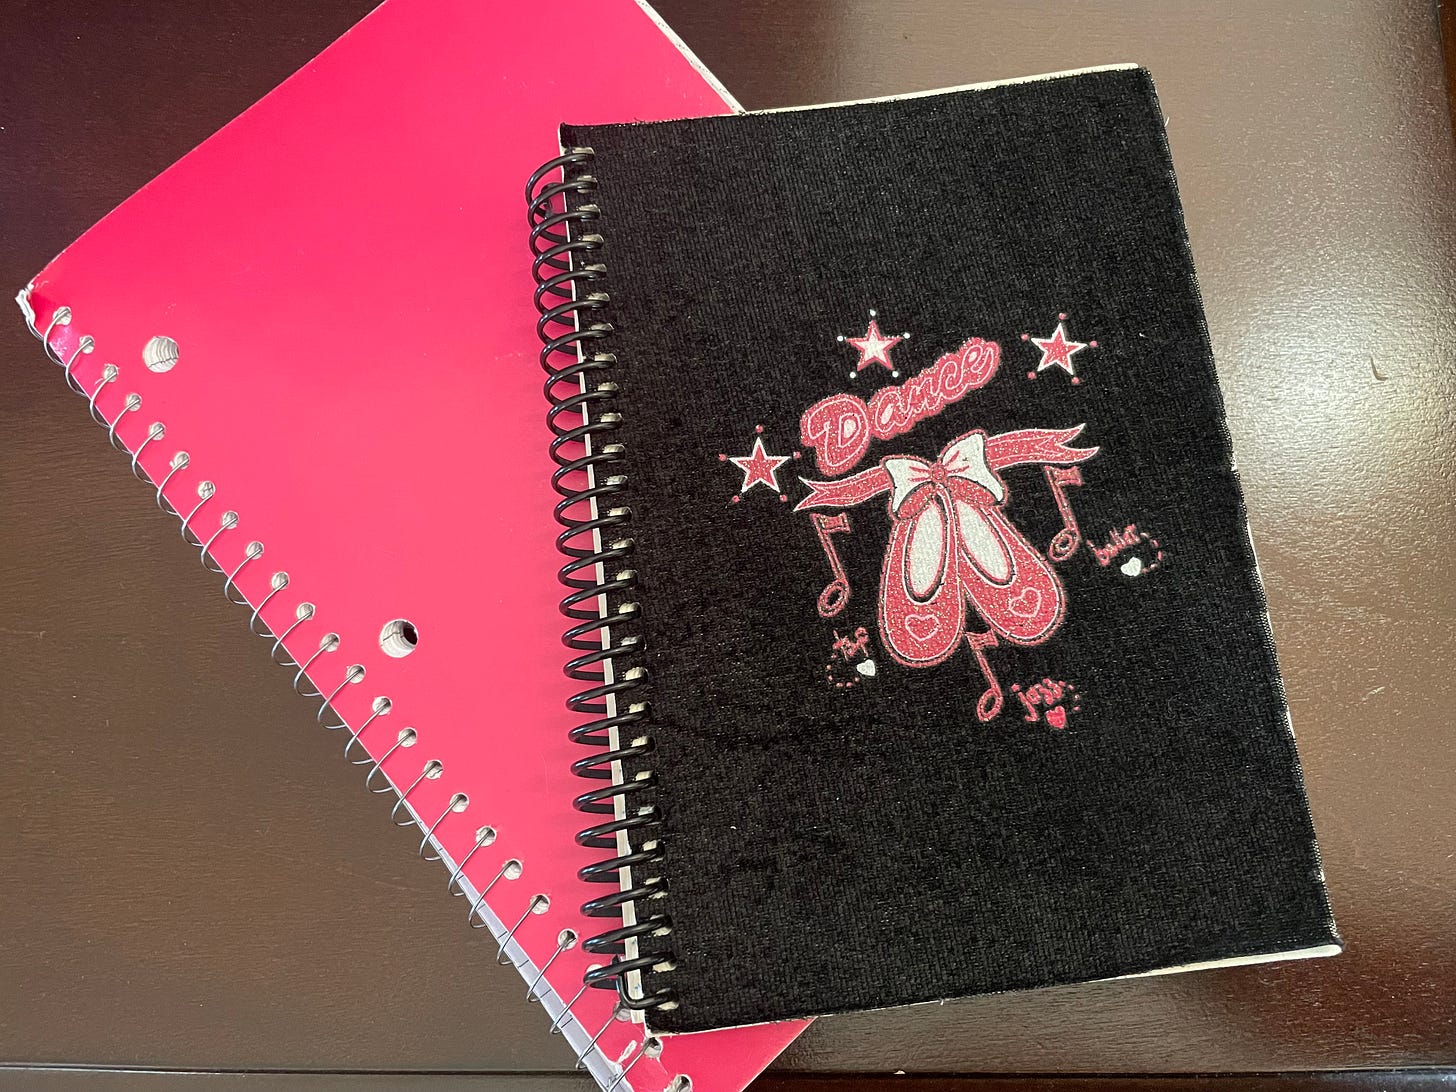 Two journals, one stacked on top of the other, atop a wooden table. The bottom one is slightly larger and pink. The top one is black, and says “Dance,” with pink illustrations of ballet shoes, hearts, and musical notes.